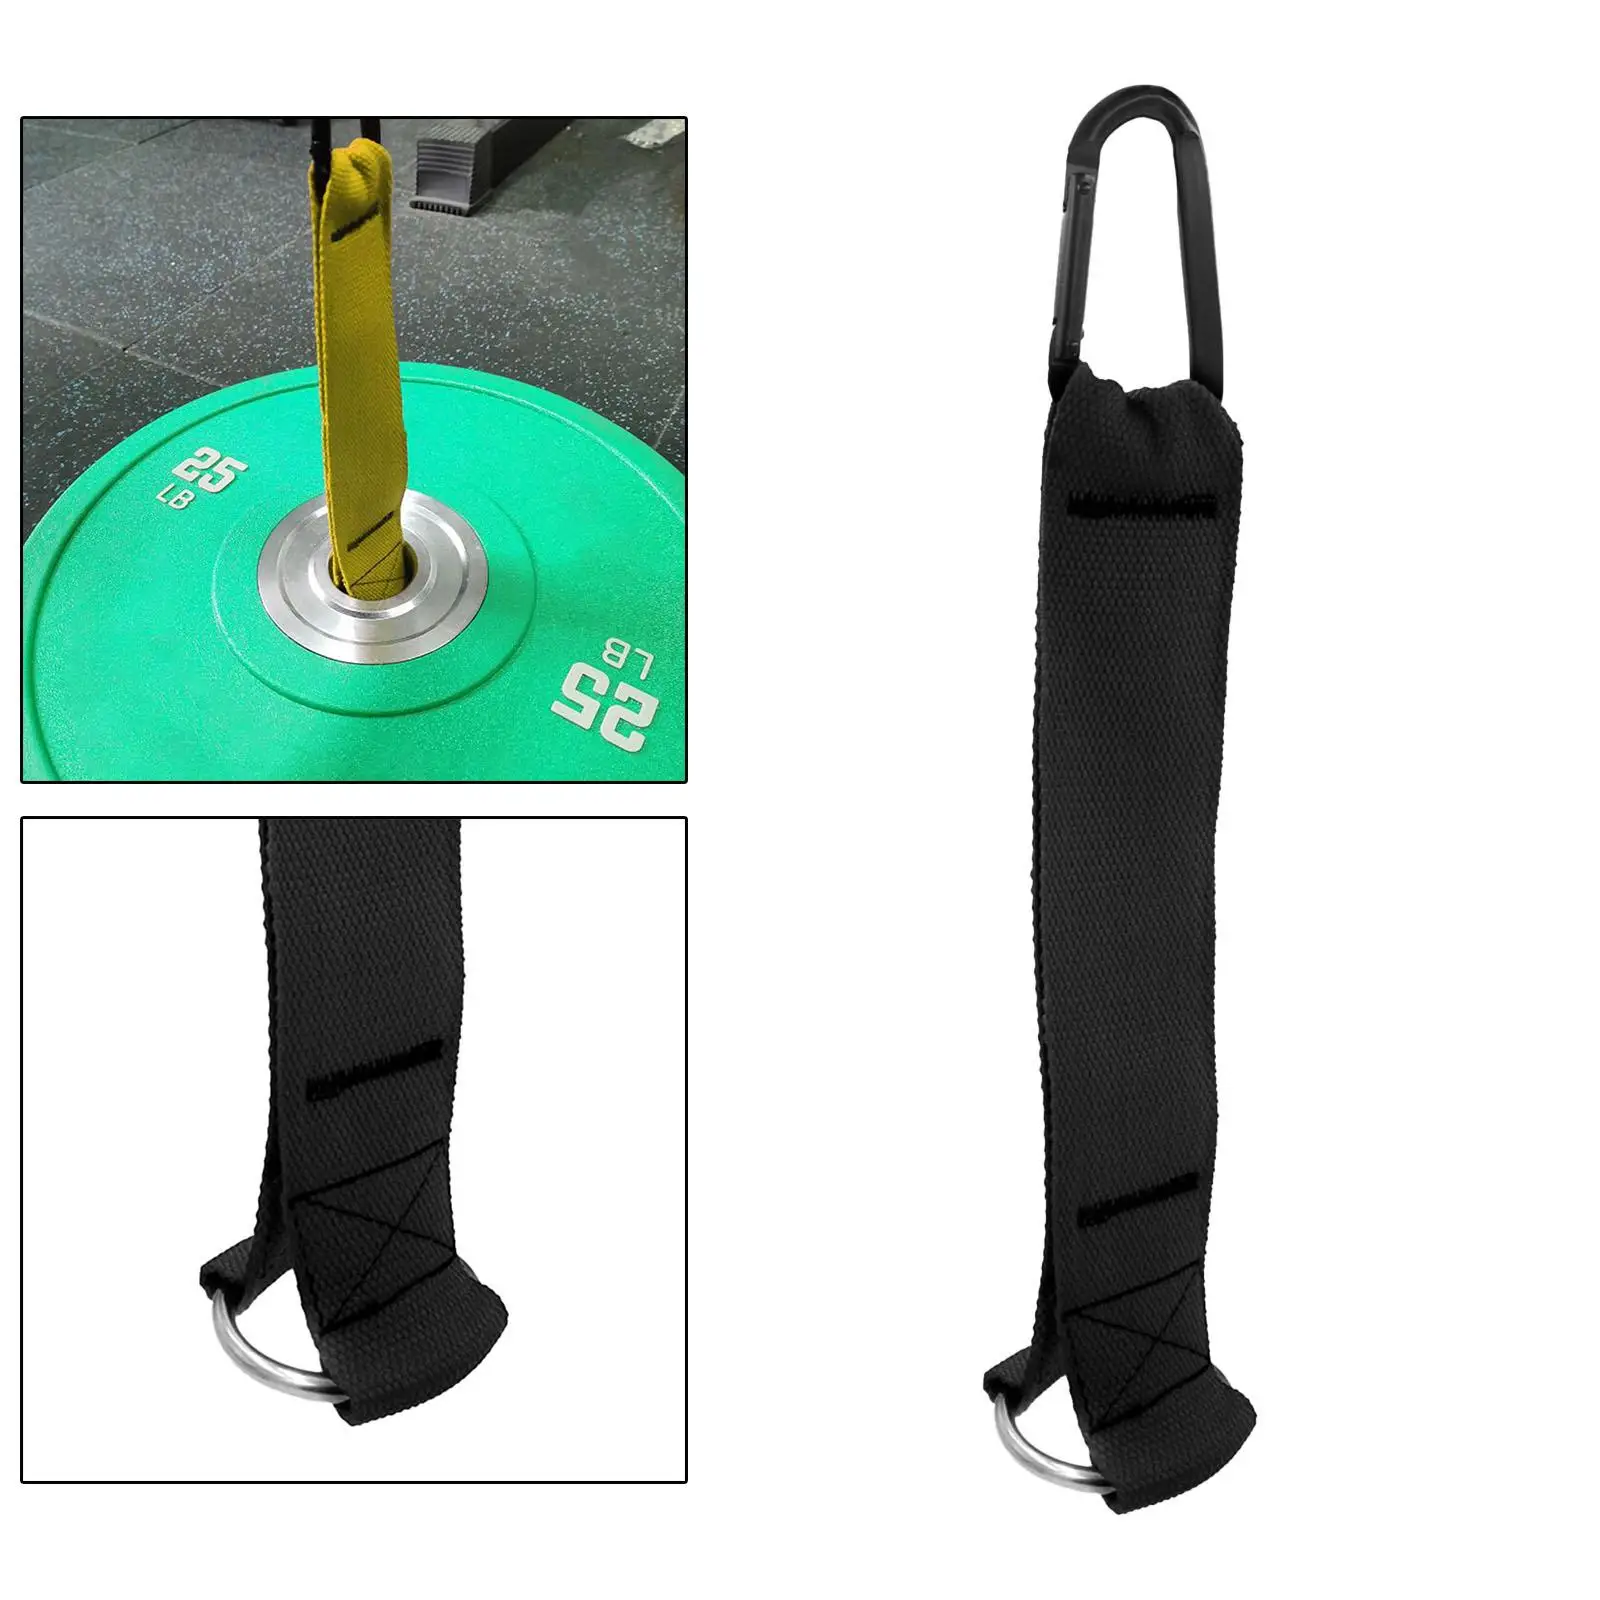 Fitness Strap Loading Pin for Weight Plates LAT Pulldowns Counterweight Belt